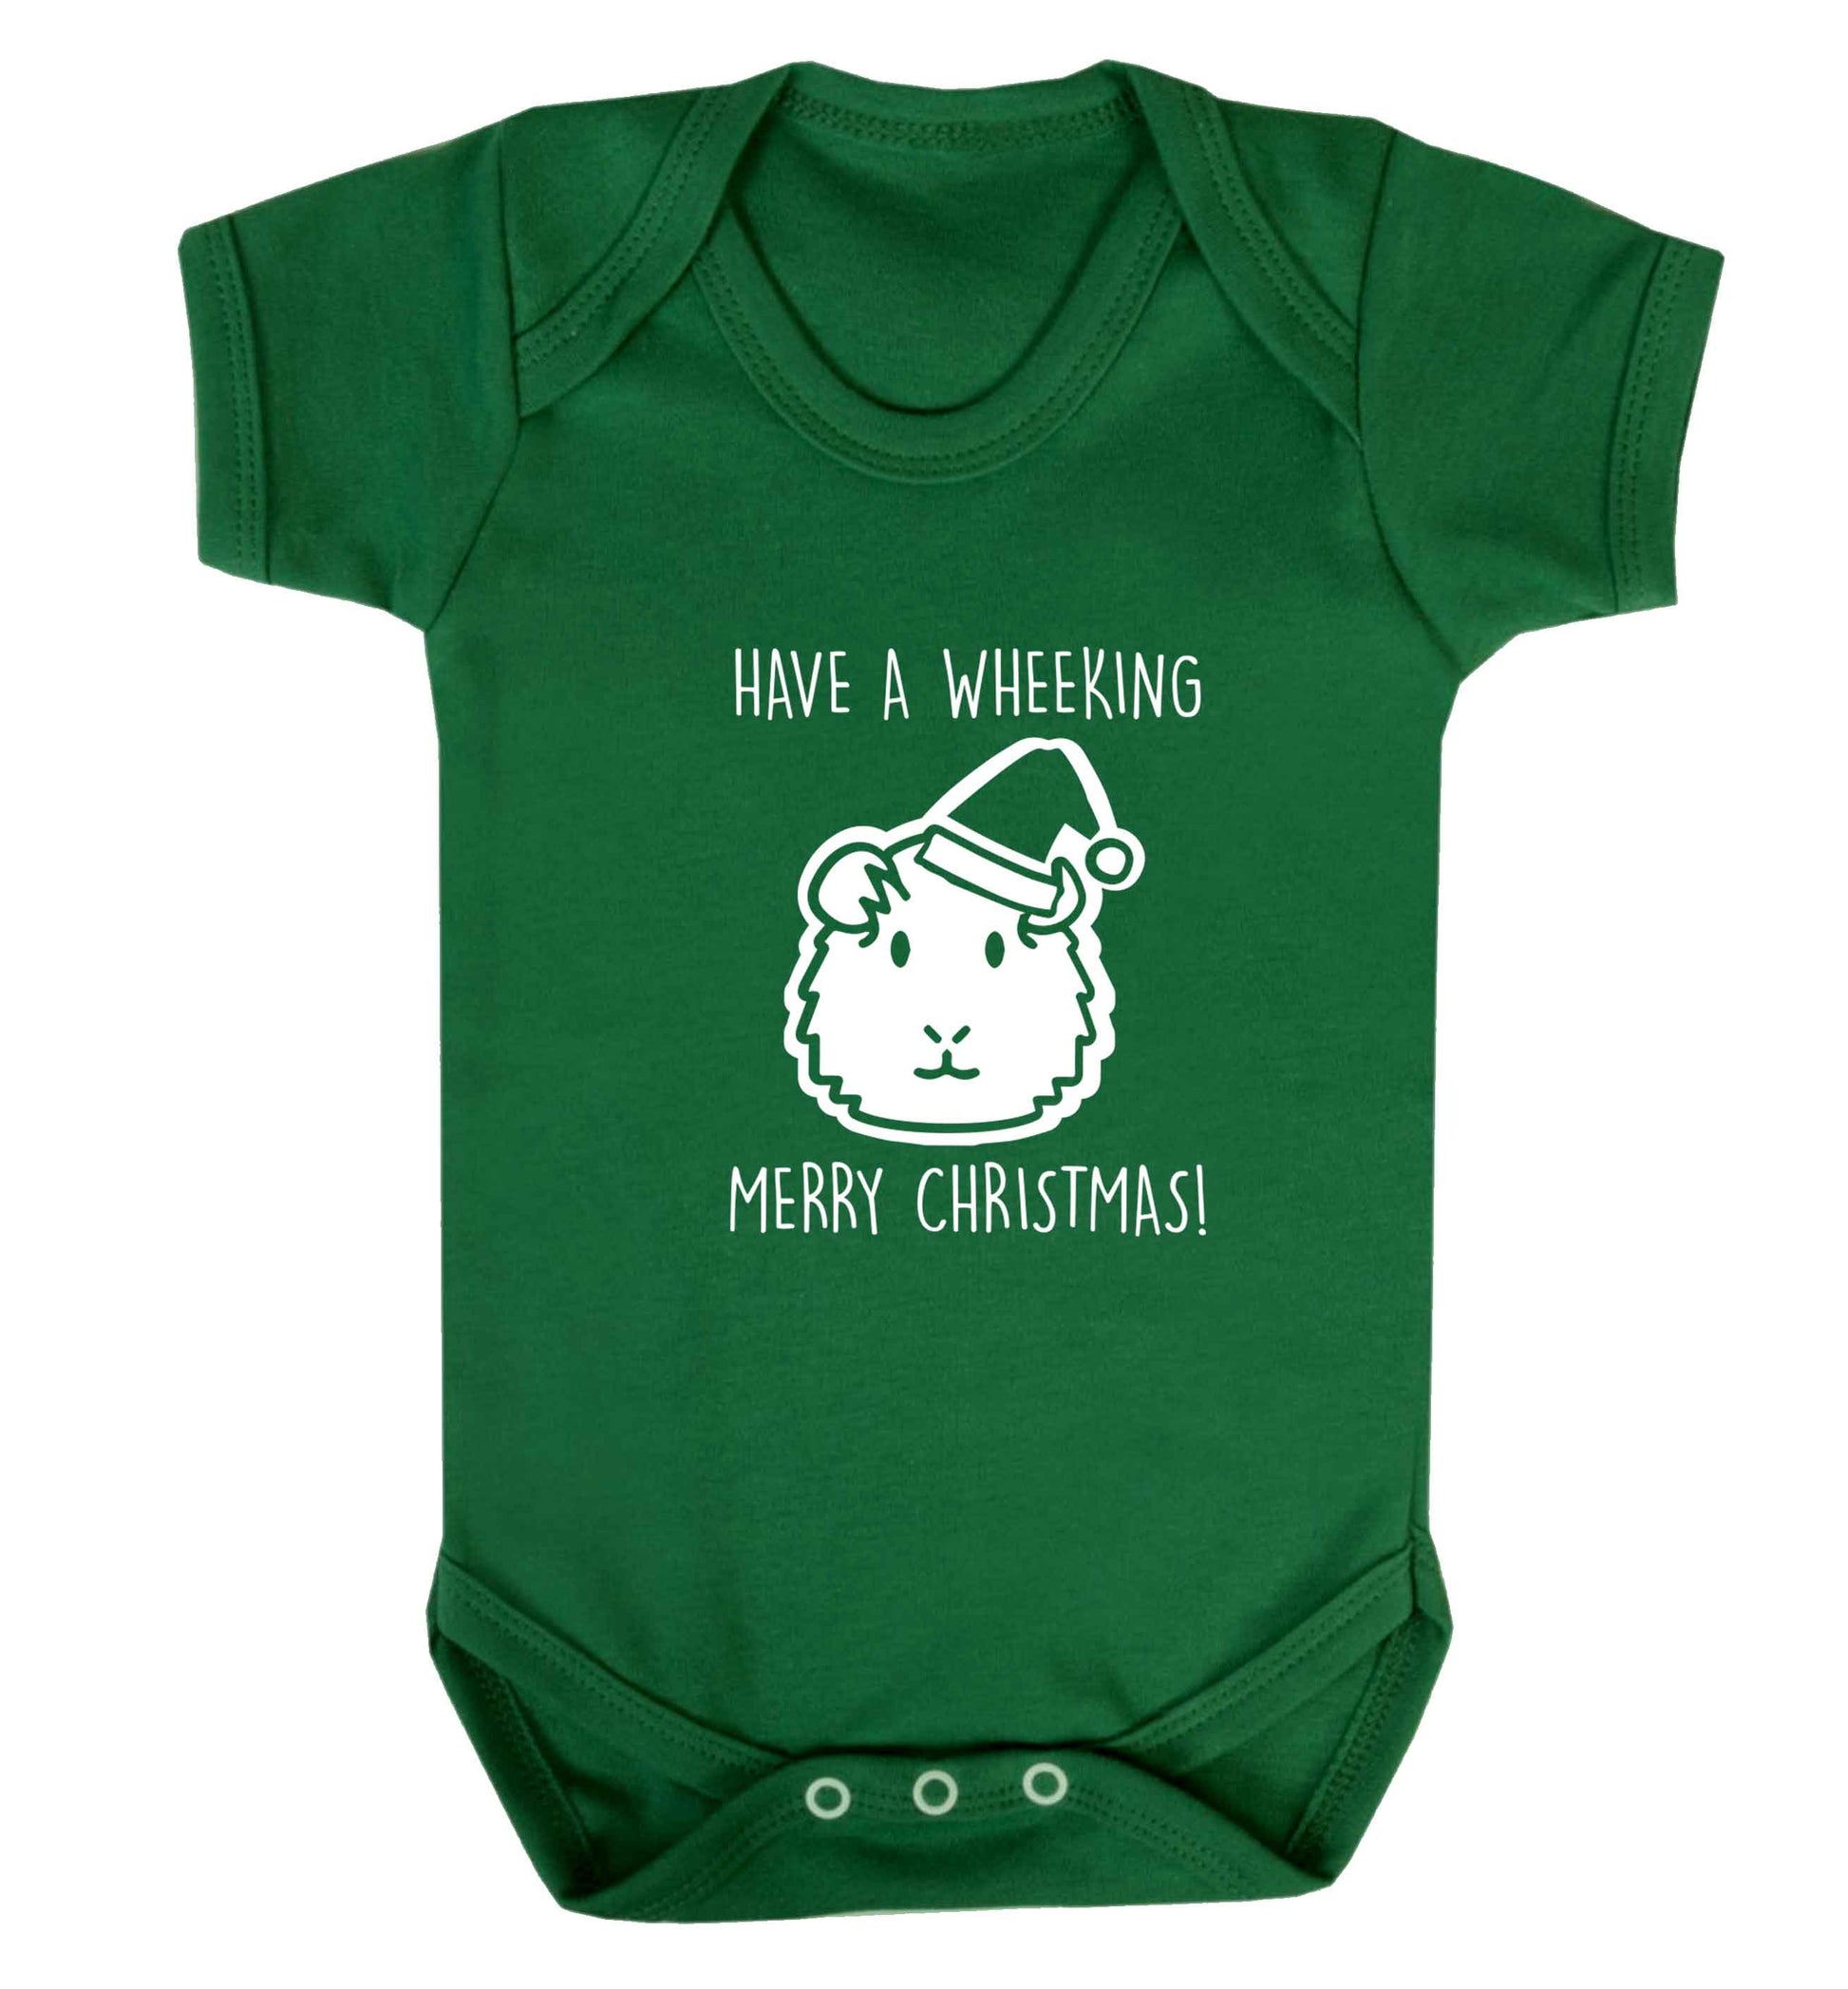 Have a wheeking merry Christmas baby vest green 18-24 months